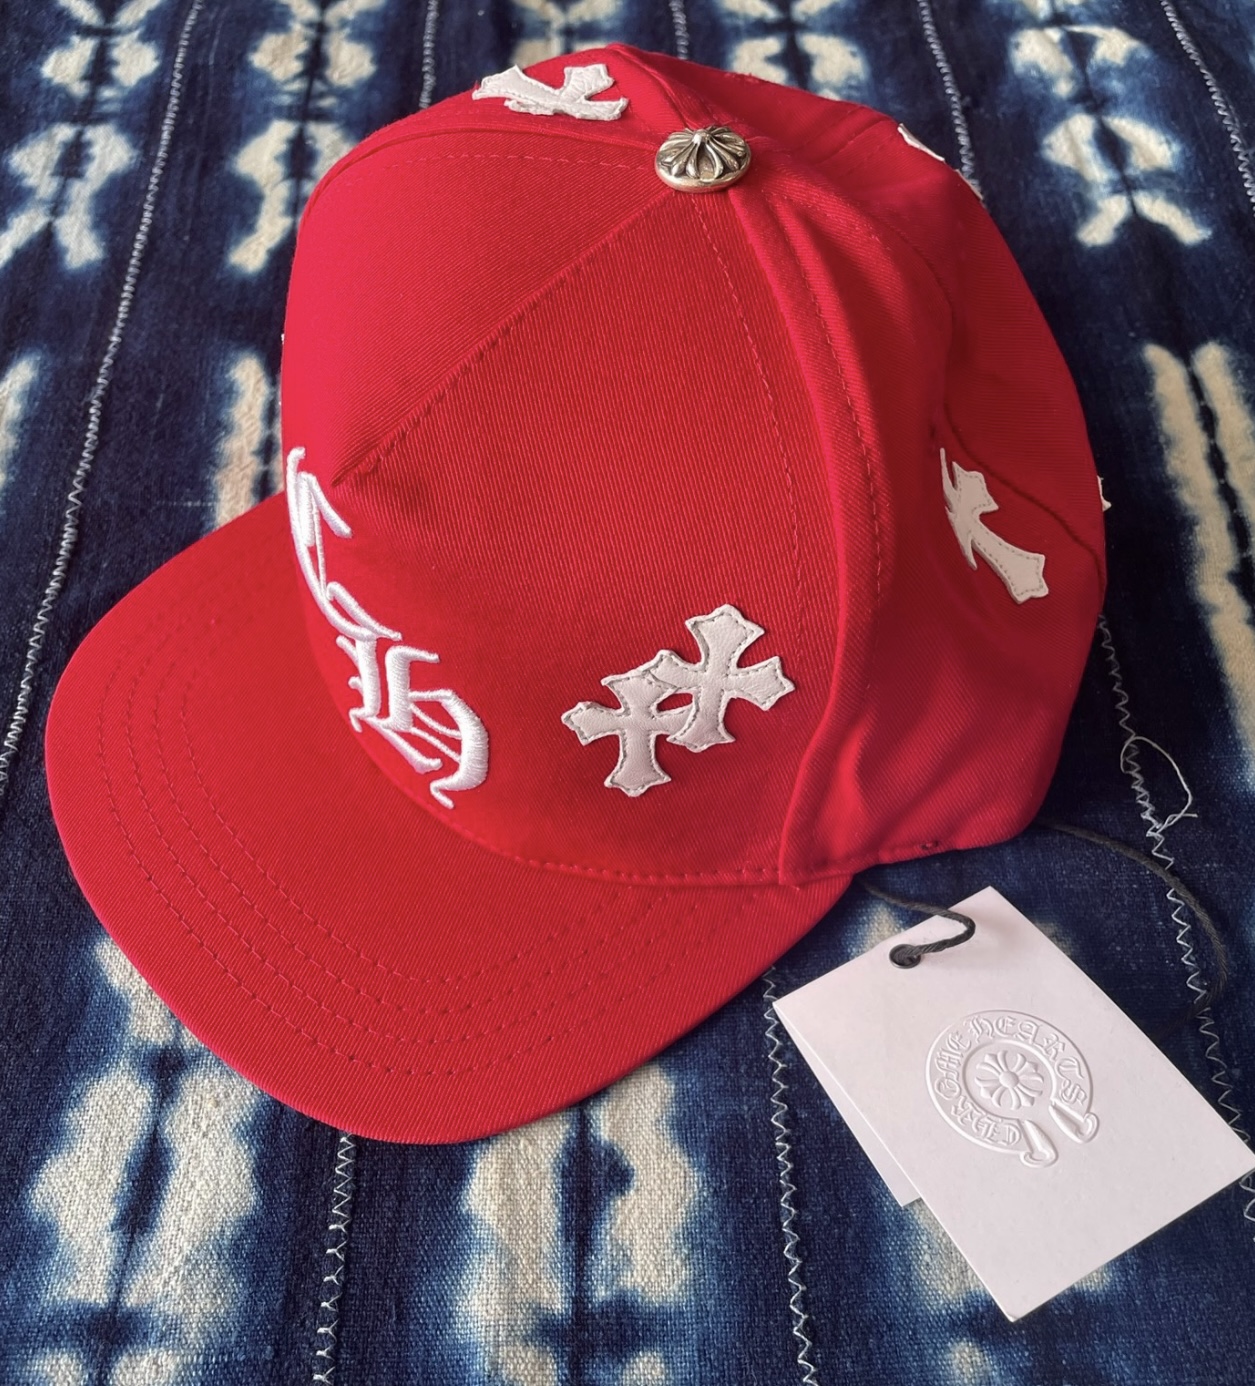 Chrome Hearts Mens Caps, Red, Large